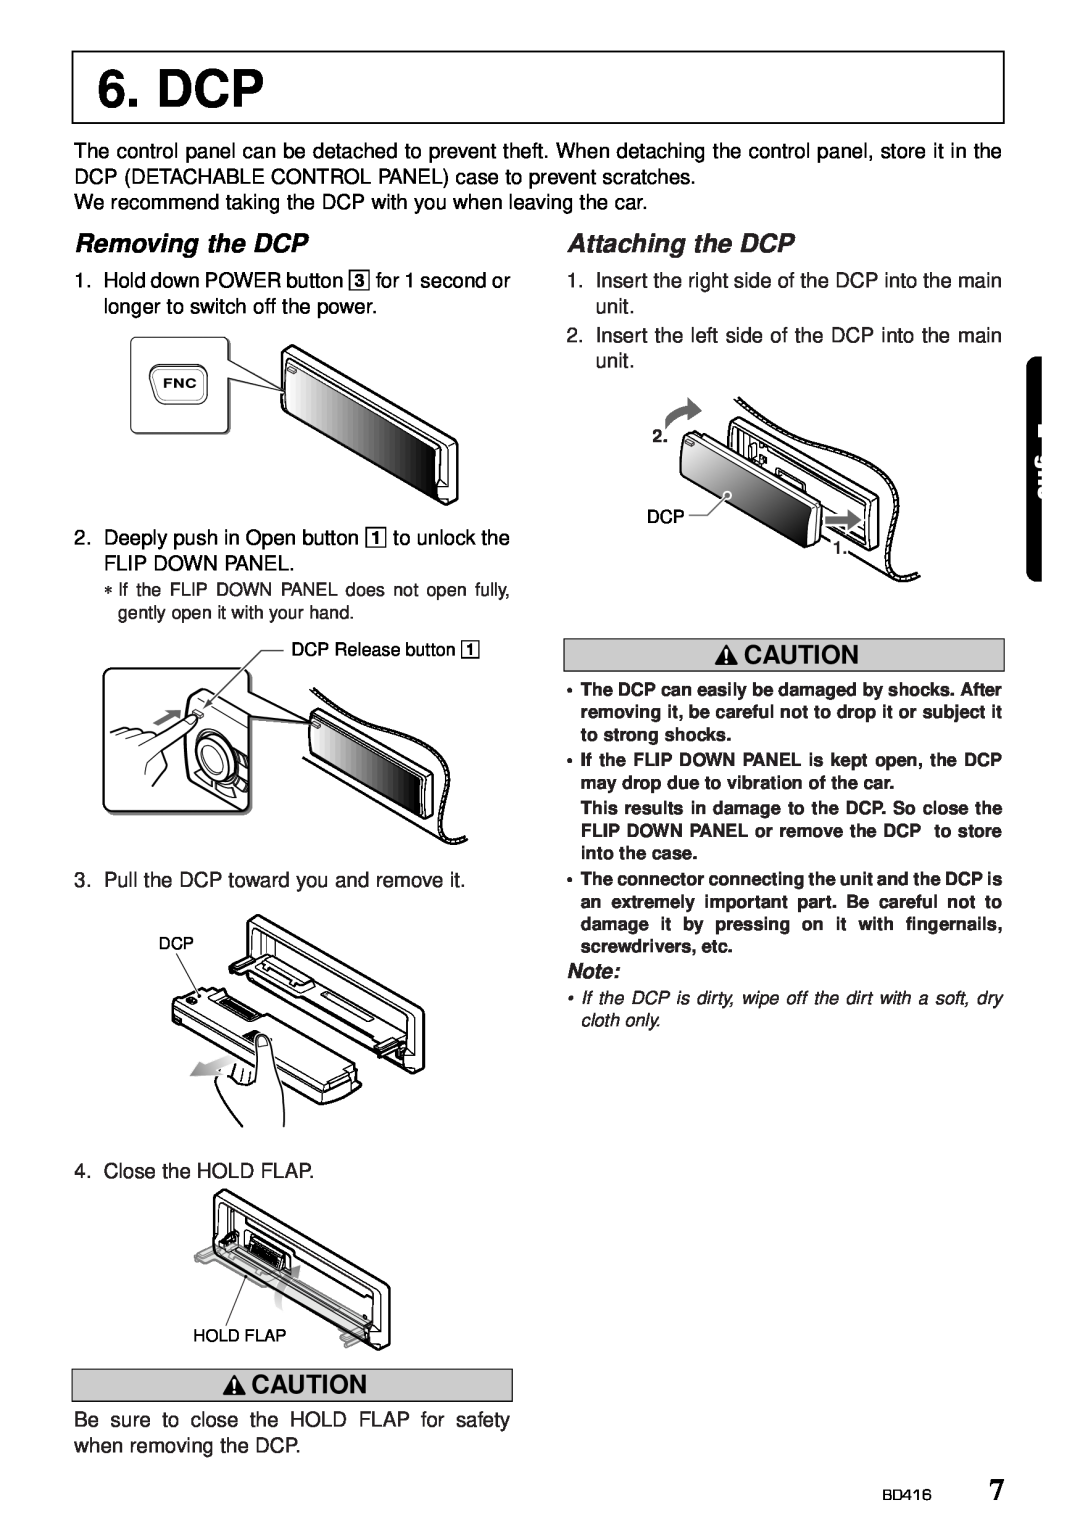 Clarion BD416 owner manual Dcp, Removing the DCP, Attaching the DCP 